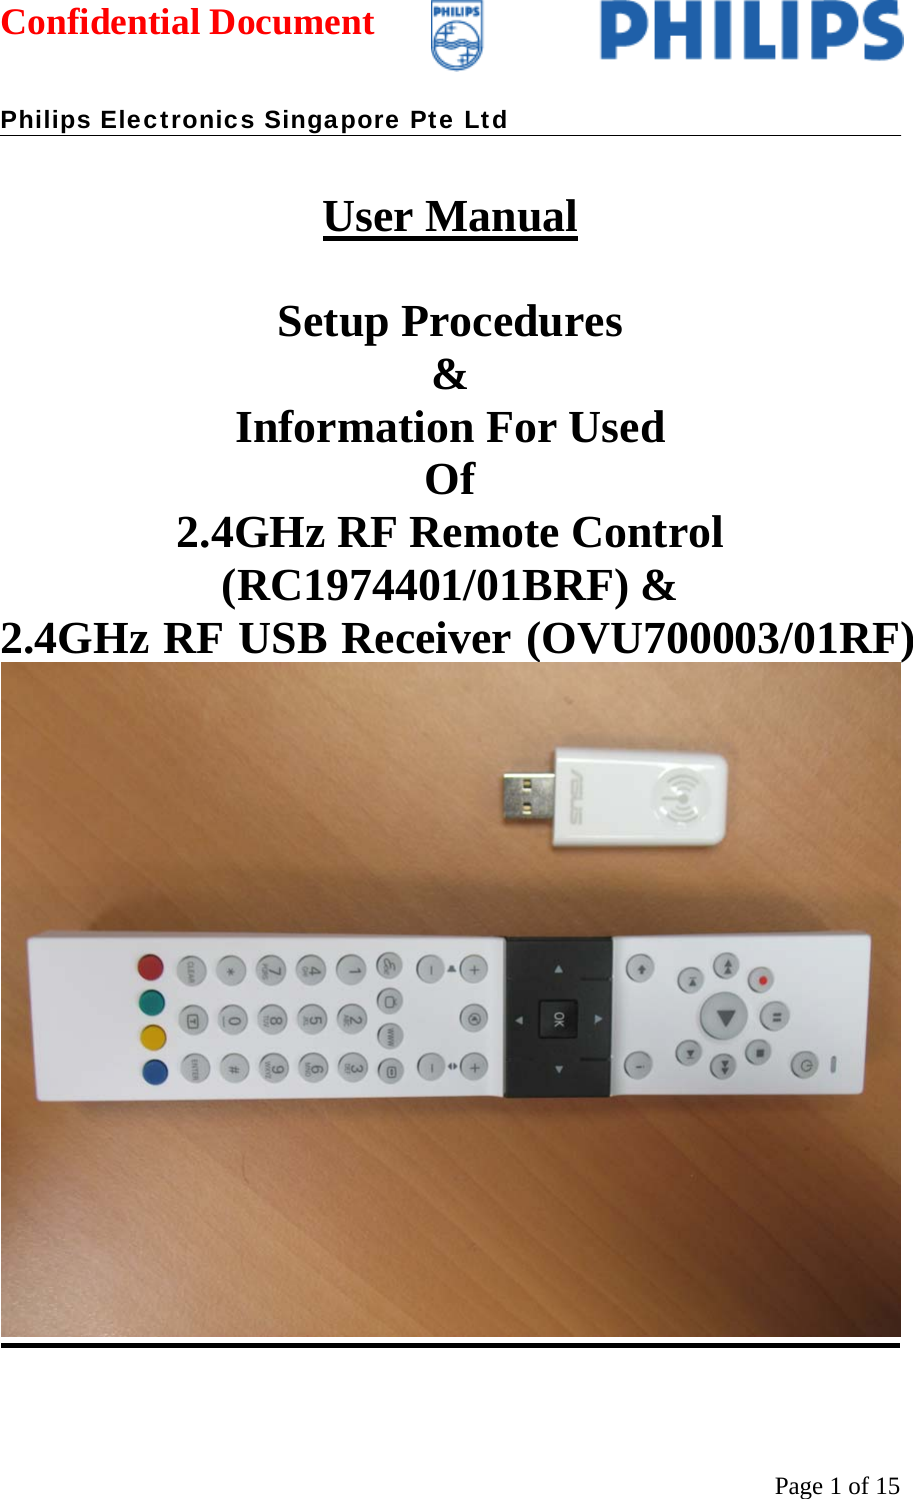 Confidential Document   Philips Electronics Singapore Pte Ltd  Page 1 of 15 User Manual  Setup Procedures &amp; Information For Used Of 2.4GHz RF Remote Control (RC1974401/01BRF) &amp;  2.4GHz RF USB Receiver (OVU700003/01RF)  